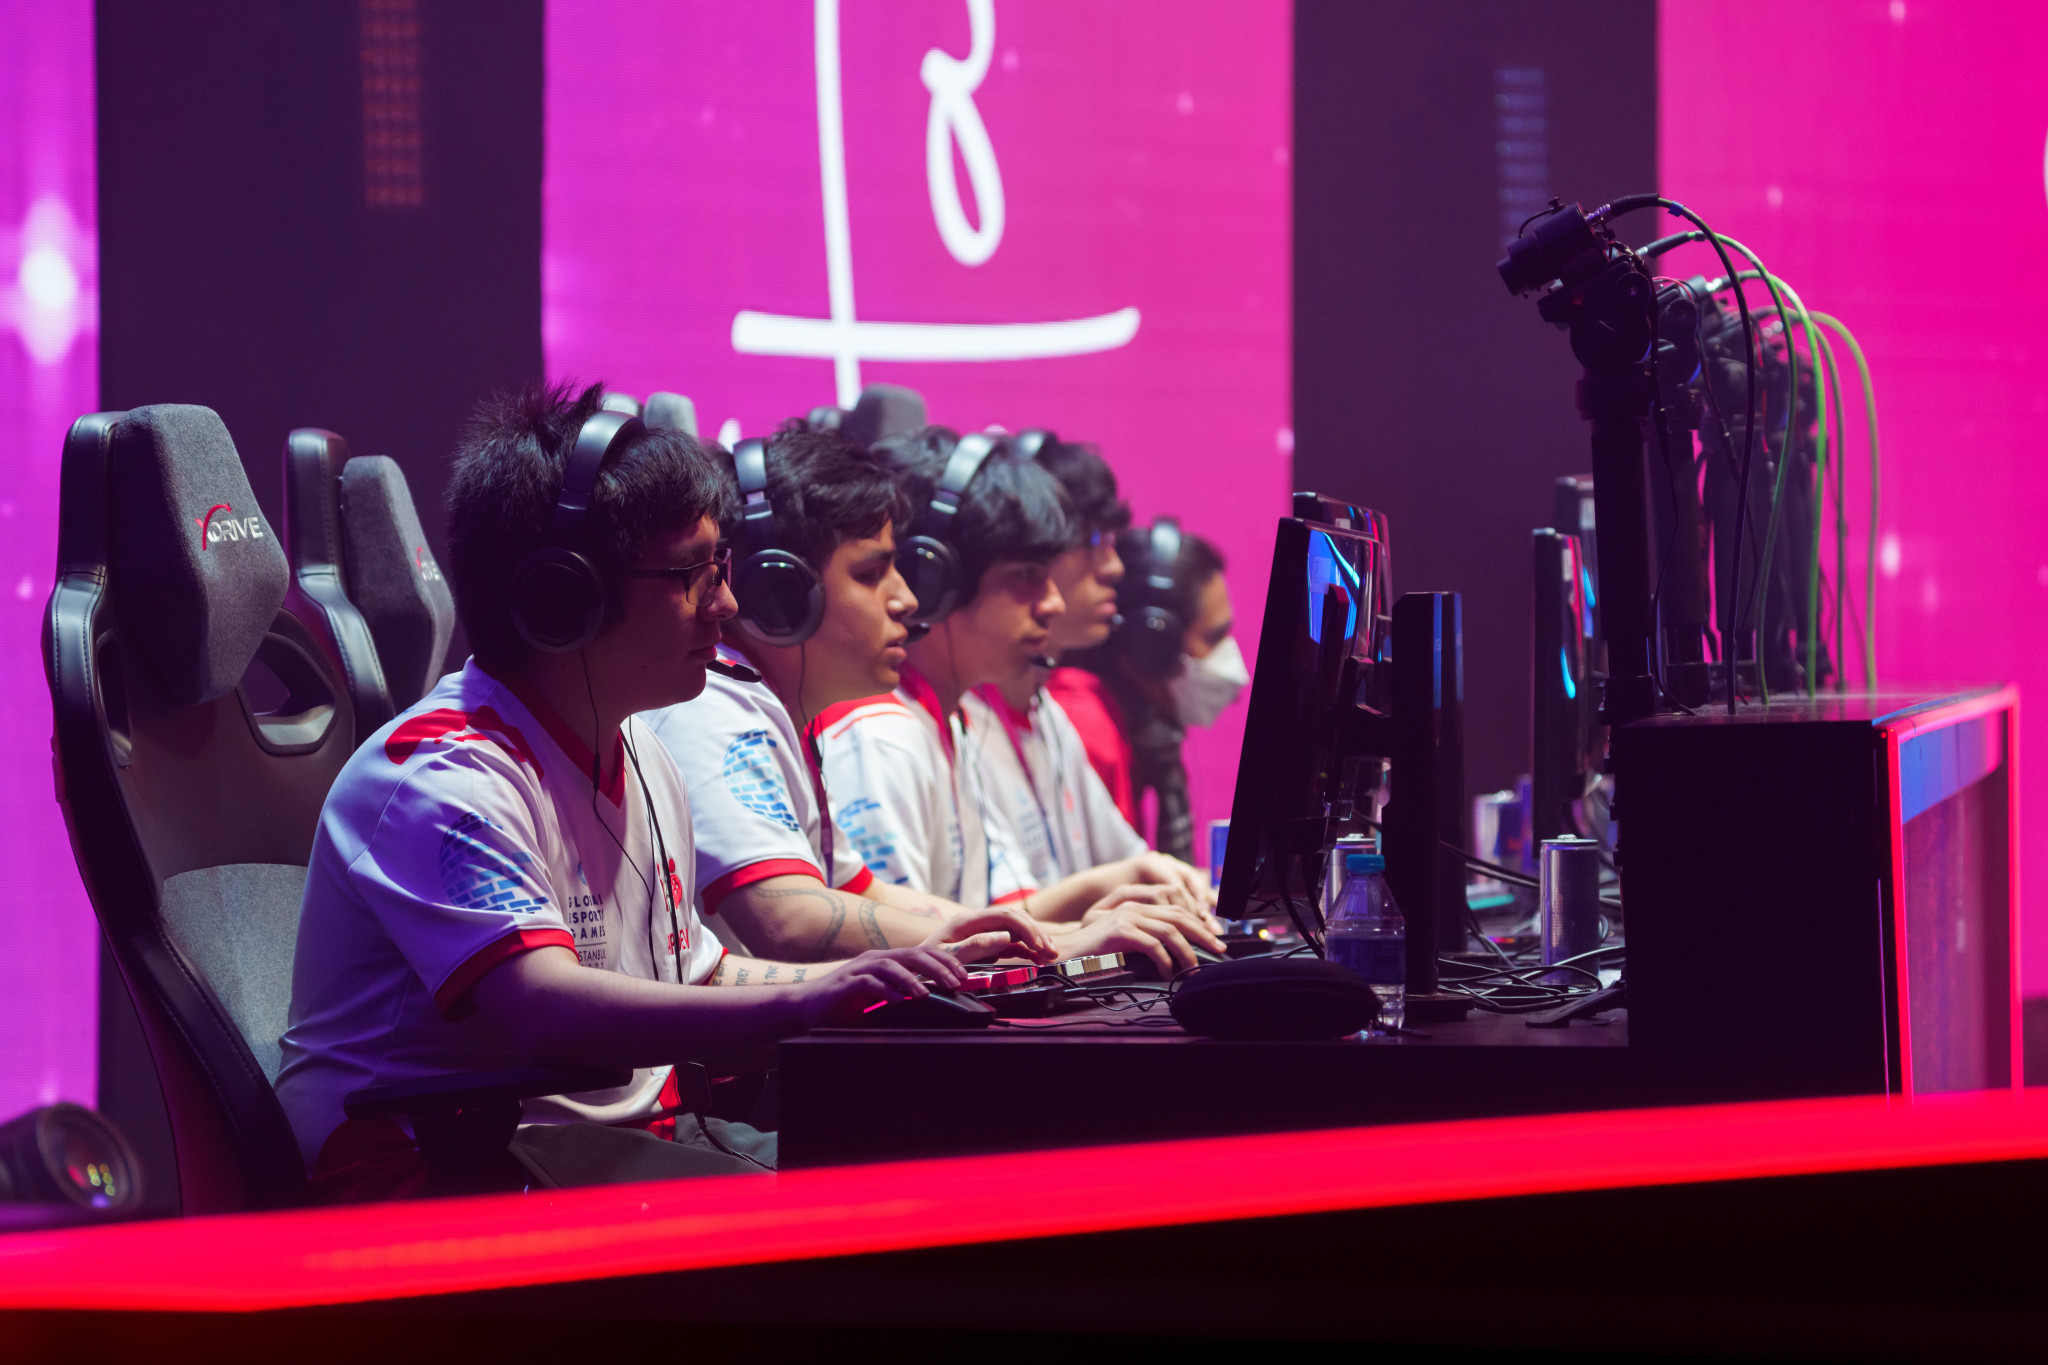 The first gold medal match of the day pitted Peru and Turkey against each other in the DOTA 2 open team tournament ©Ben Queenborough/GEF